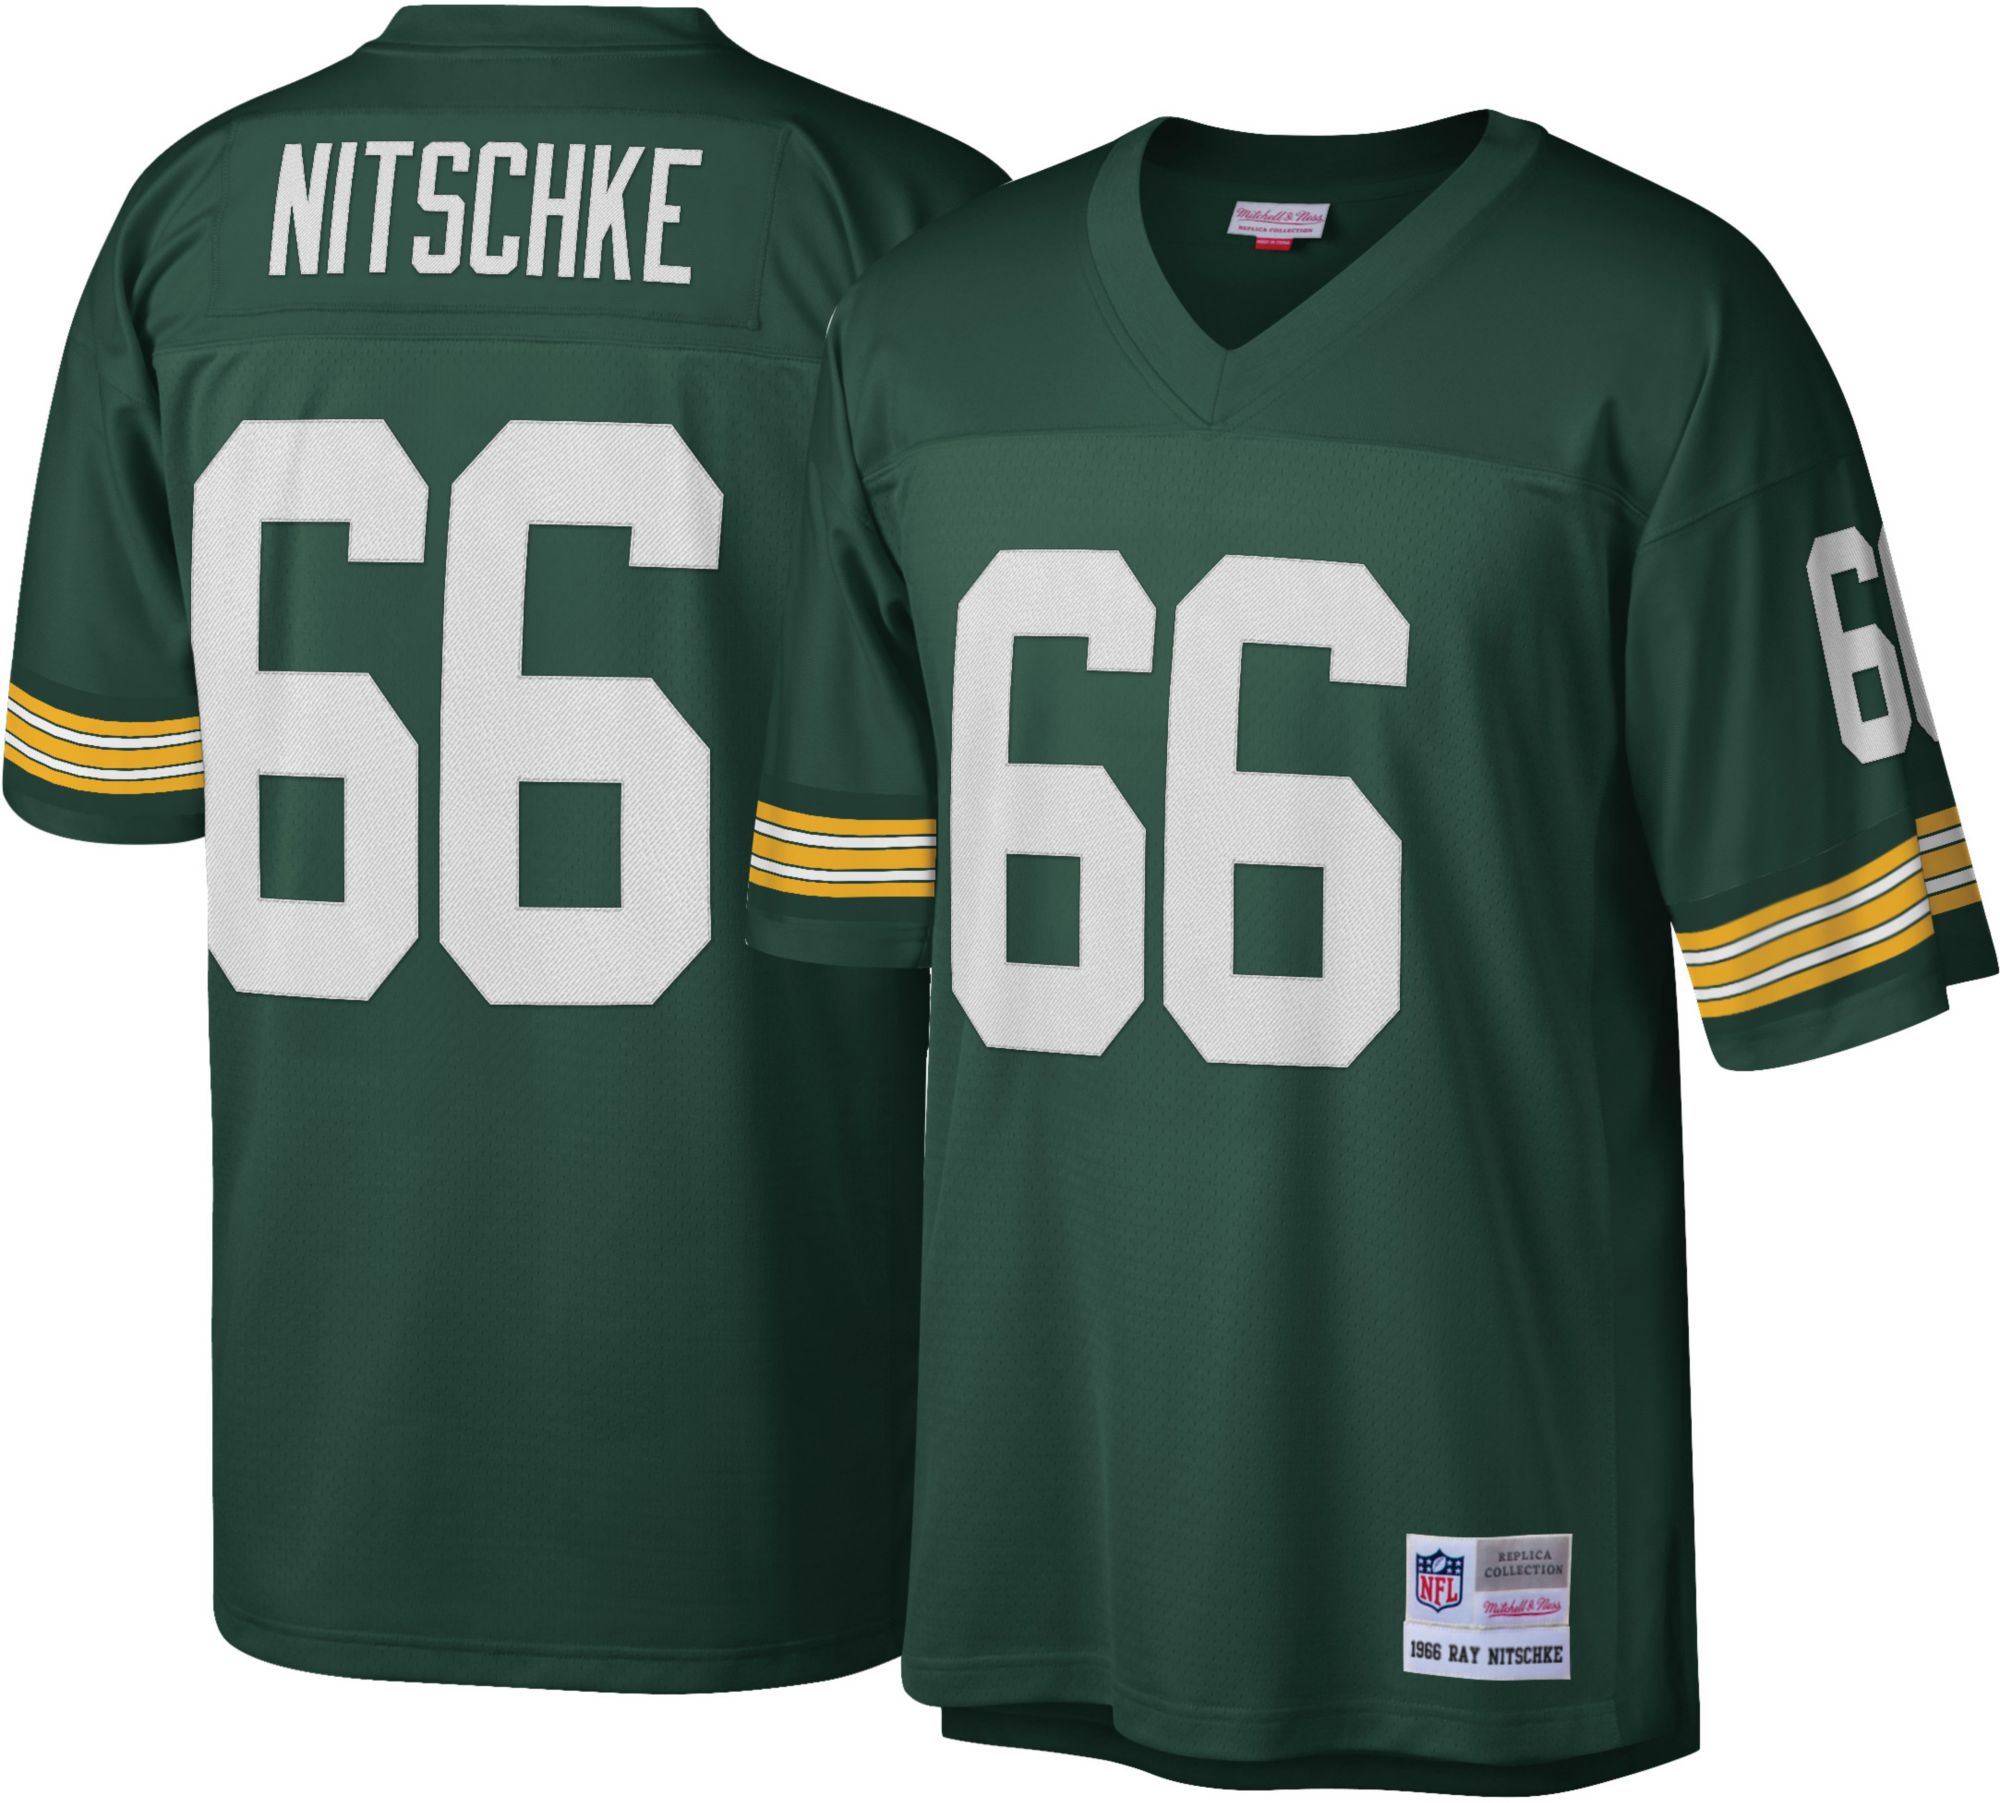 packers 66 jersey